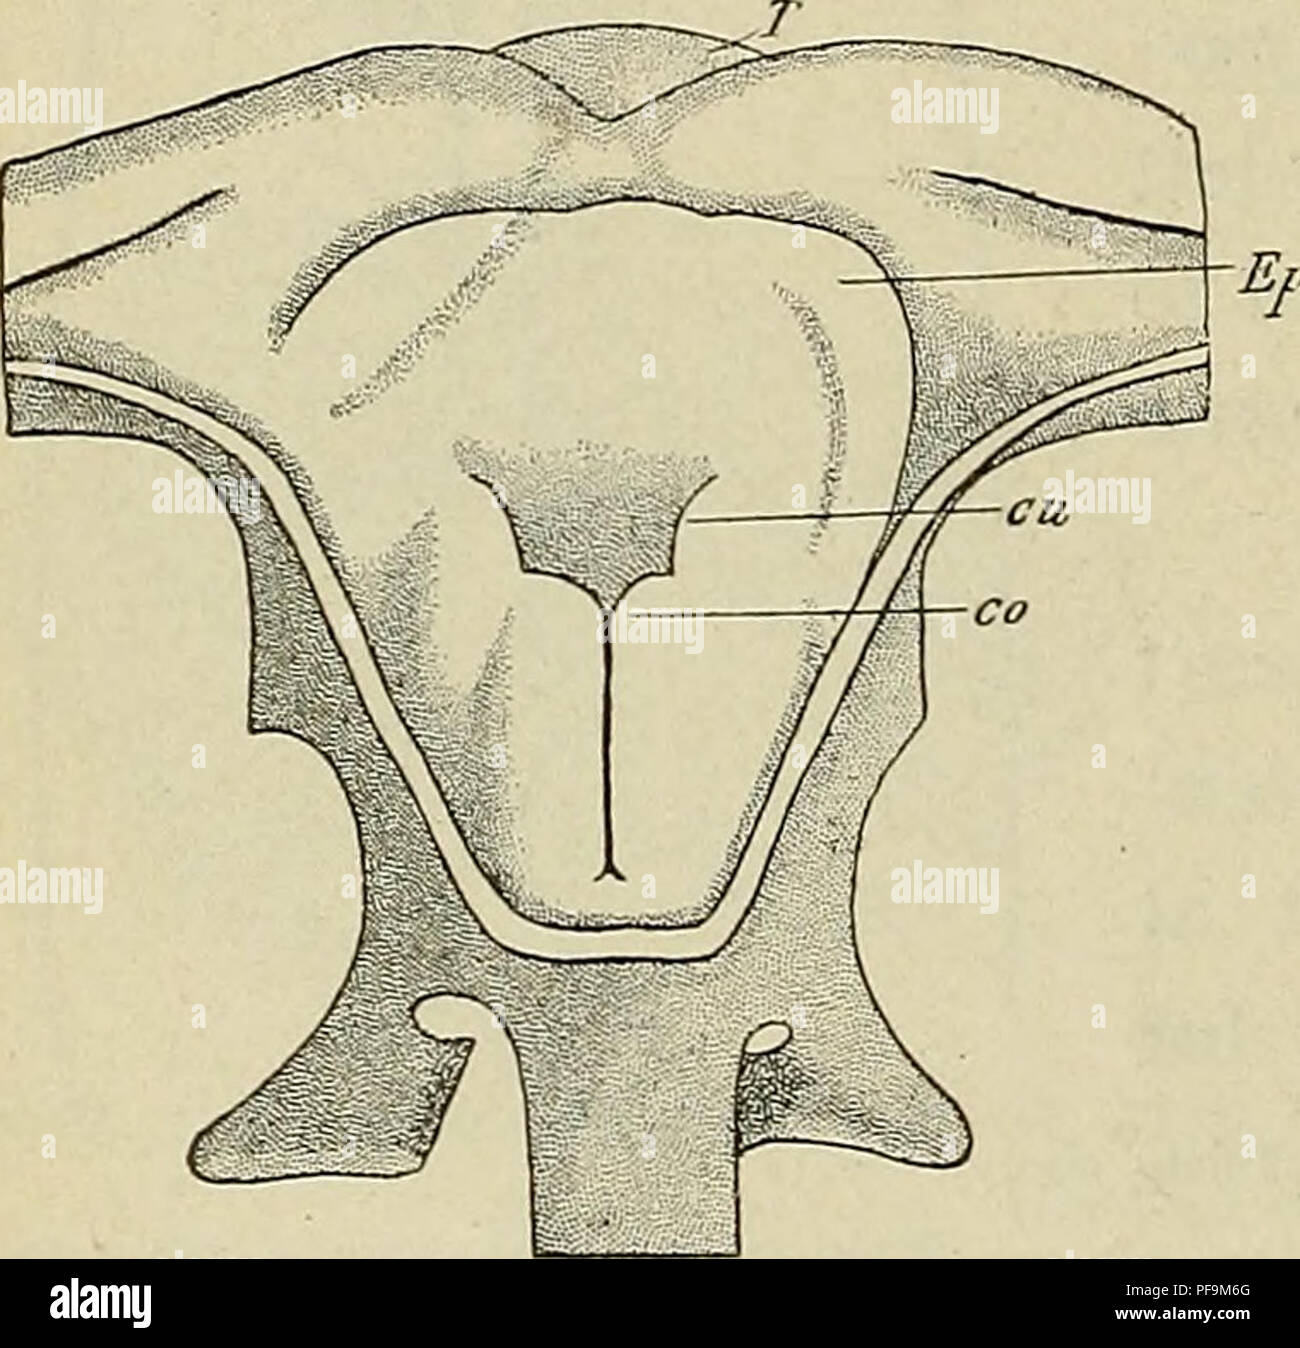 . The development of the human body : a manual of human embryology. Embryology; Embryo, Non-Mammalian. 334 THE LARYNX In later stages the various bronchi of each lobe give rise to additional branches and these again to others, and the mesenchyme of each lobe grows in between the various branches. At first the amount of mesenchyme separating the branches is comparatively great, but as the branches continue, the growth of the mesenchyme fails to keep pace with it, so that in later stages the terminal enlarge- ments are separated from one another by only very thin partitions of mesenchyme, in whi Stock Photo